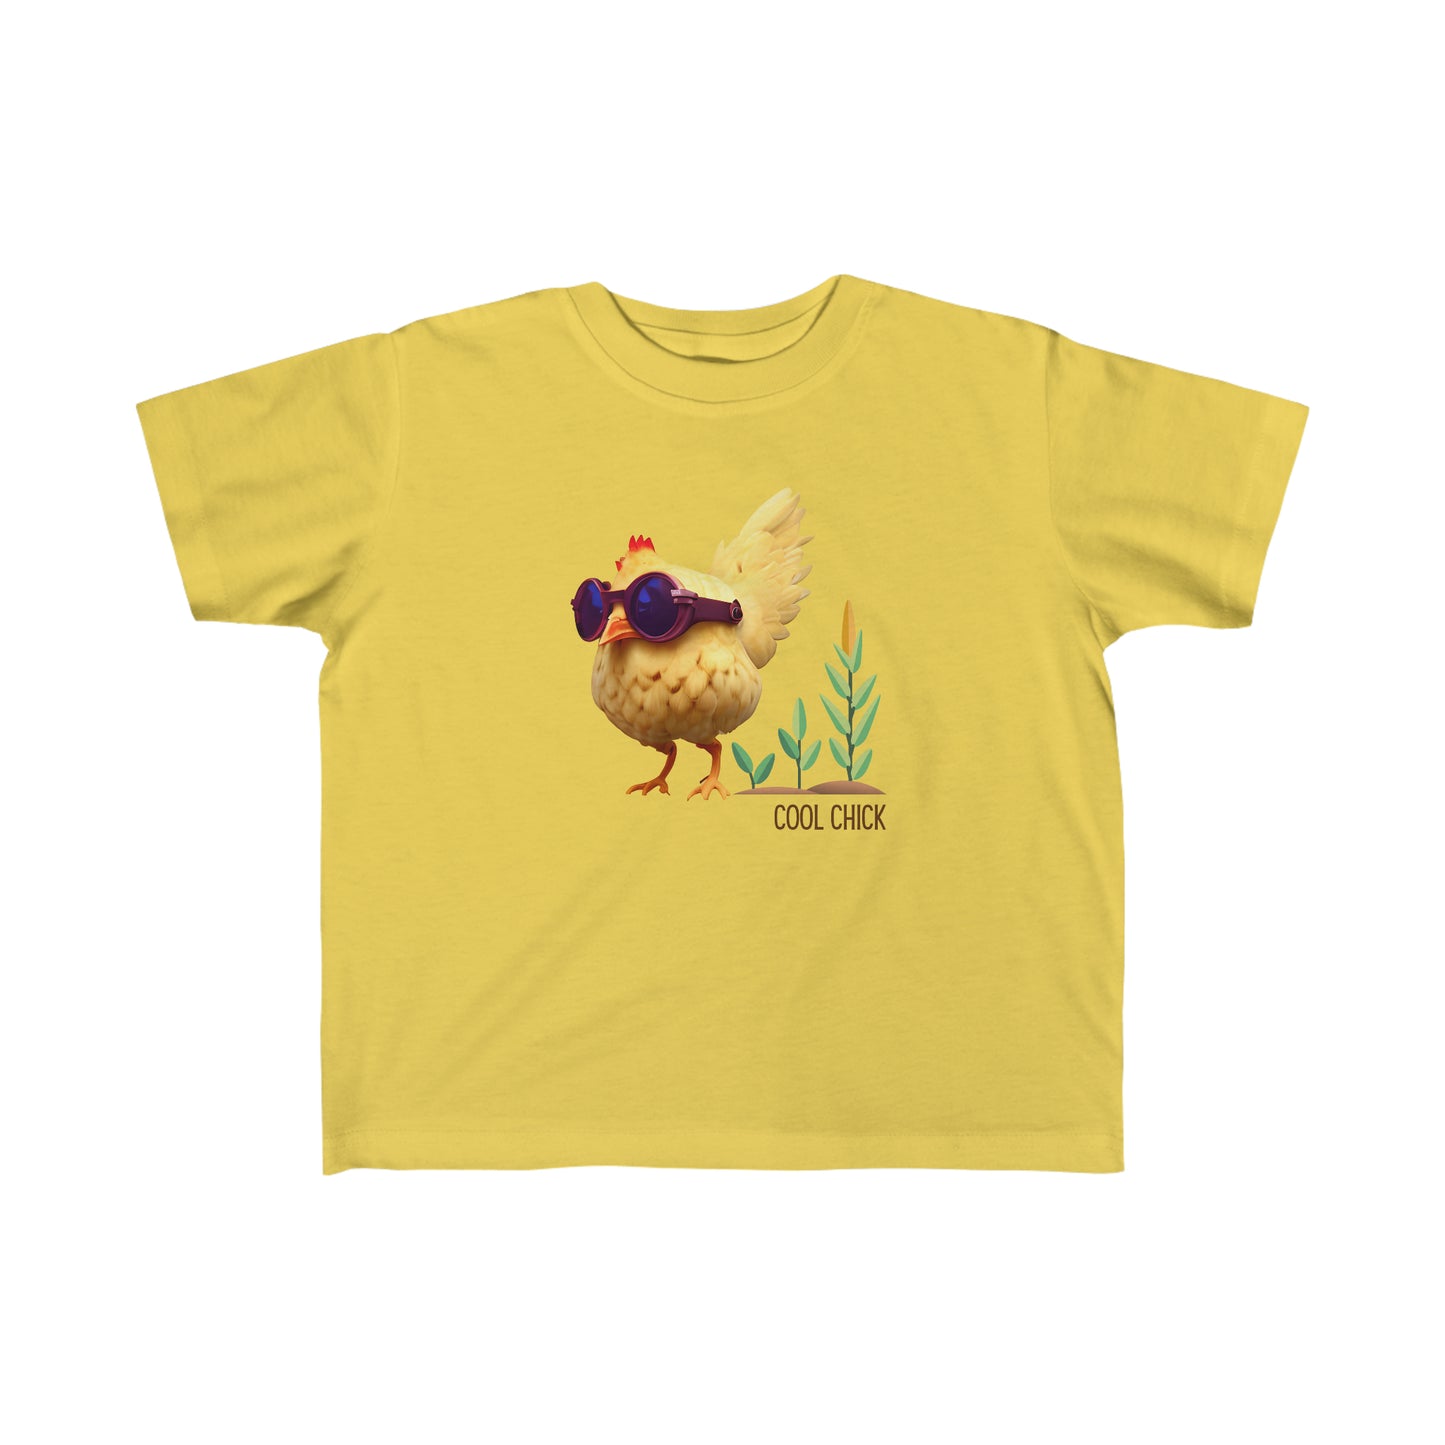 Cool Chick T-shirt in Butter Yellow